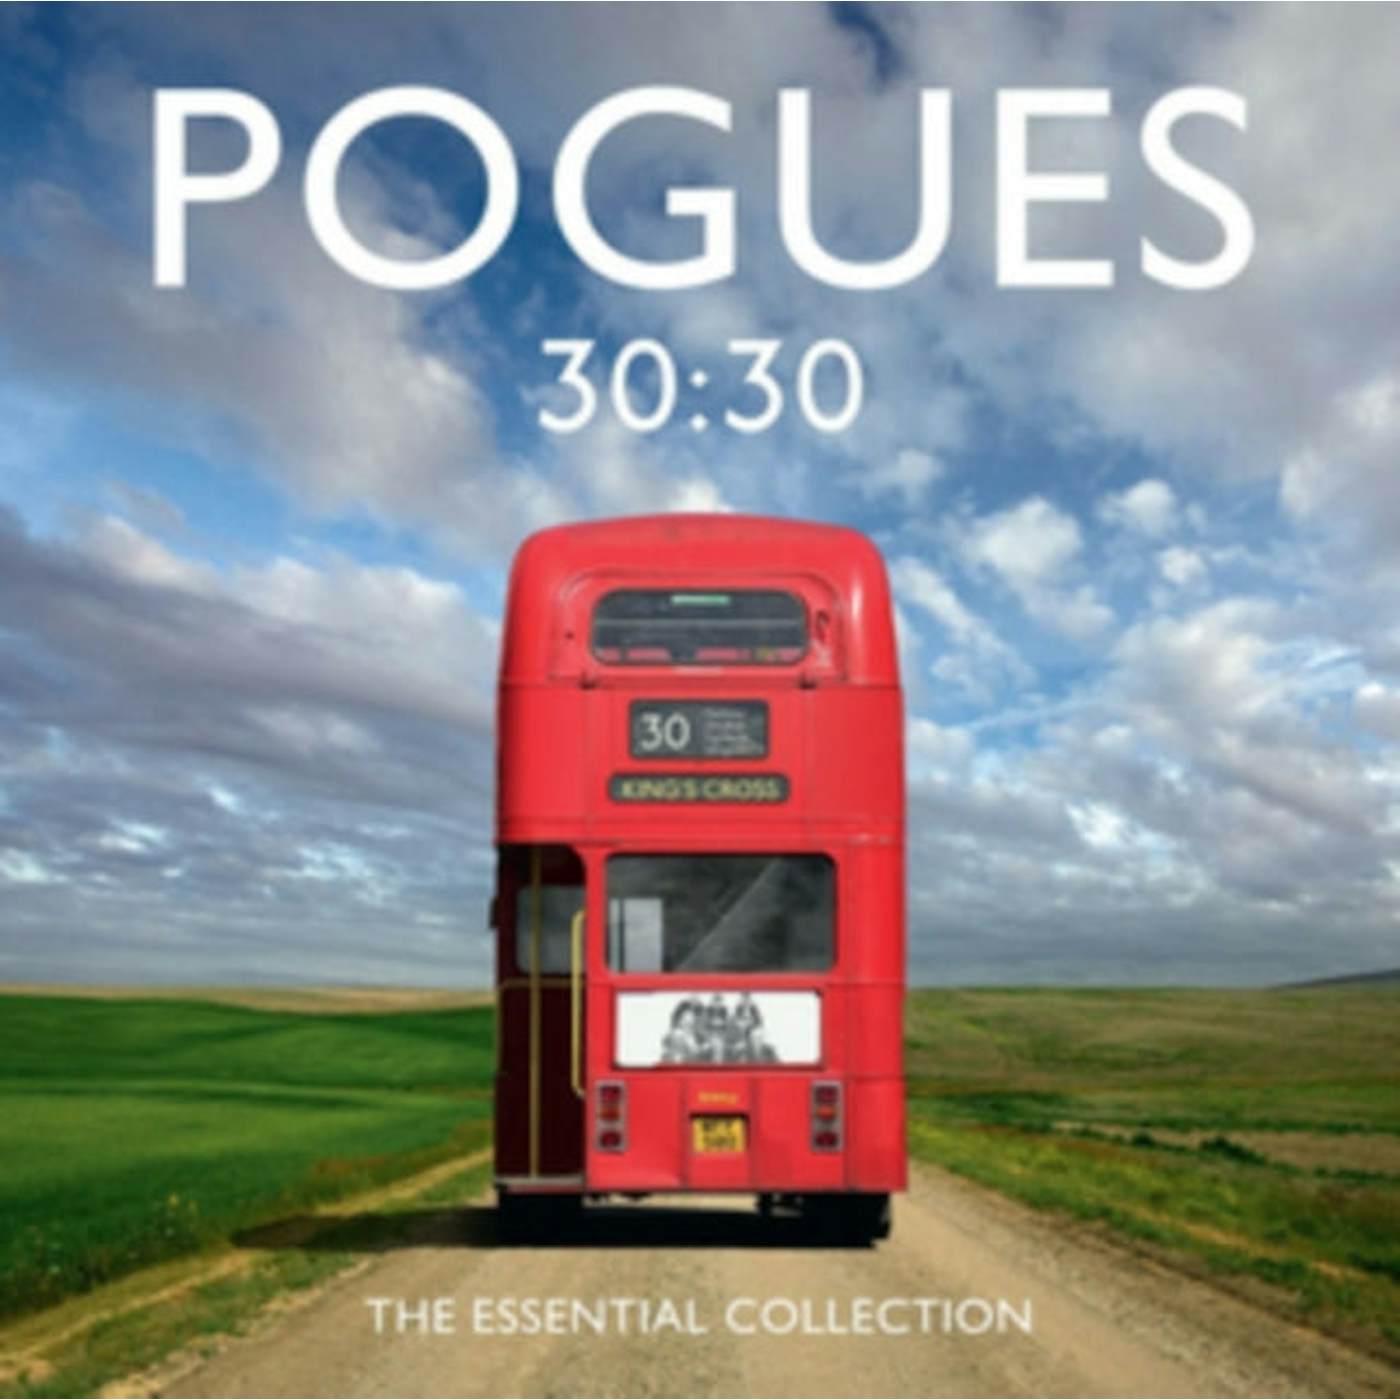 The Pogues CD - 30:30 - The Essential Collection